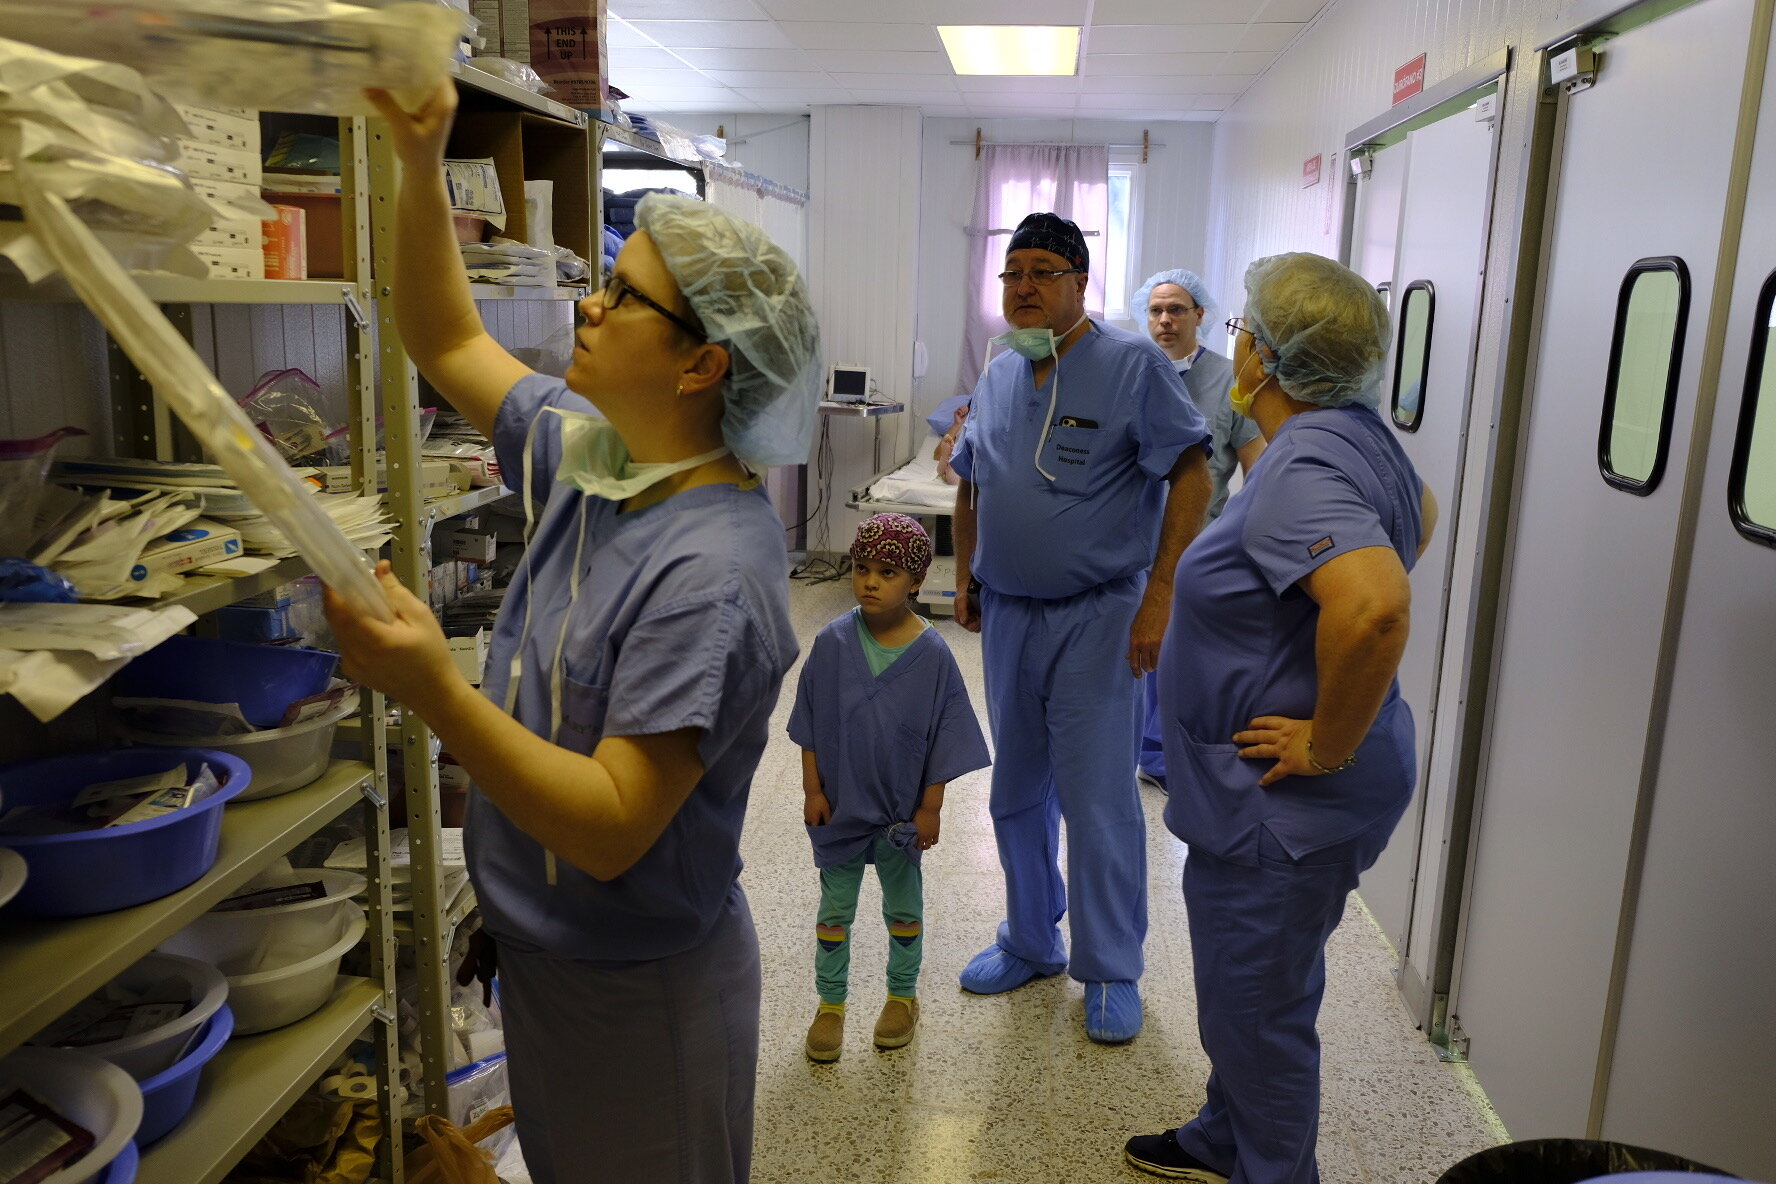  Dr. Angela Martin, ( foreground ), Lexie Martin, Dr. Don Patterson, Kerwyn Martin, and Valorie Qualey survey the surgical supplies. 